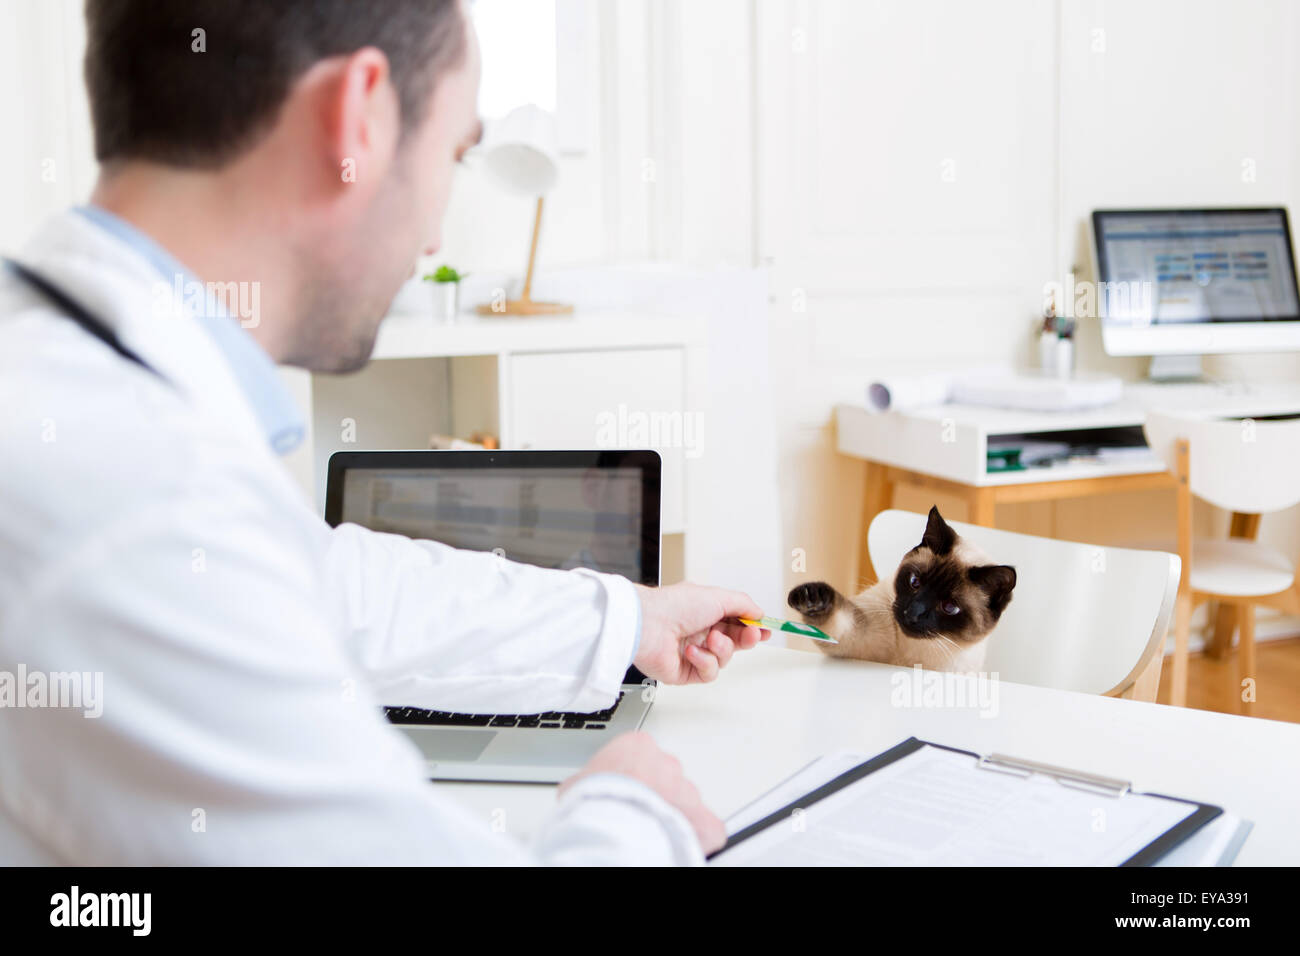 Illustration of Concept of Health insurance for pets Stock Photo